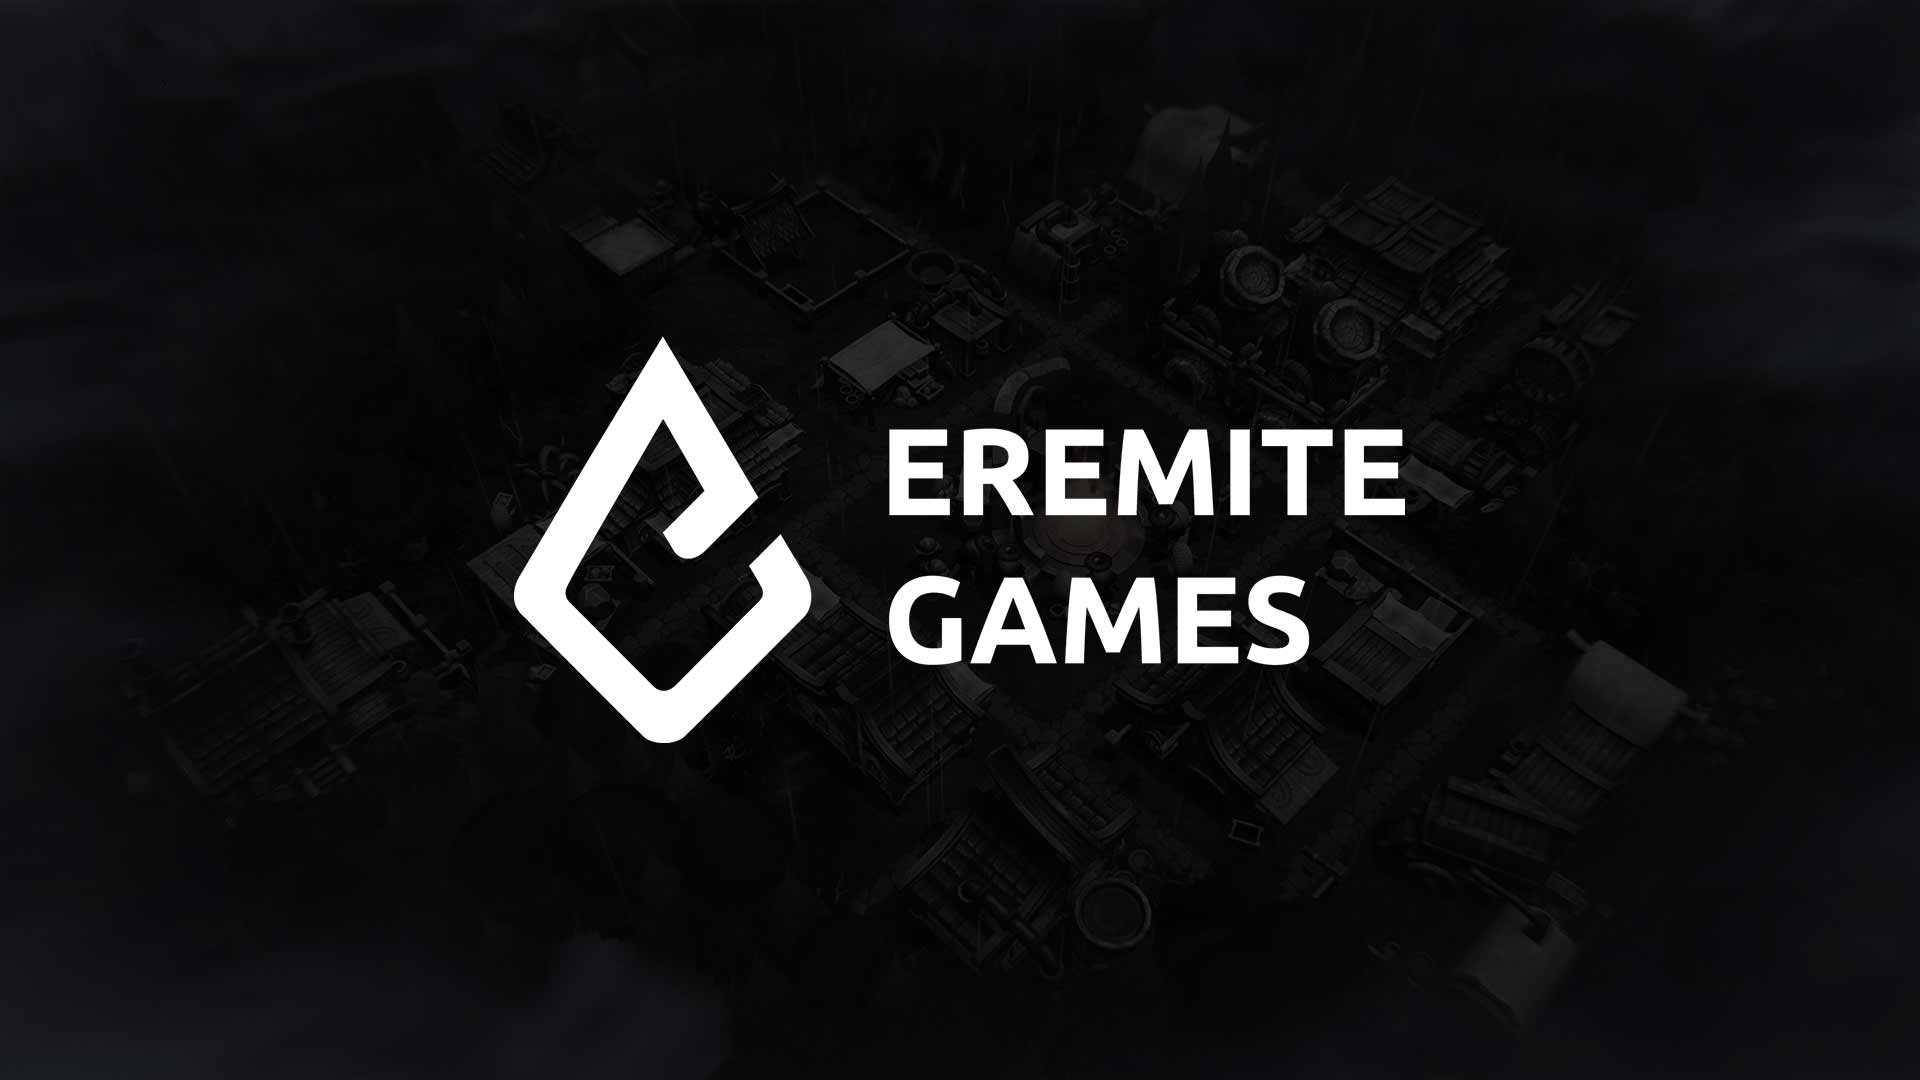 Android Apps by Eremite Games on Google Play